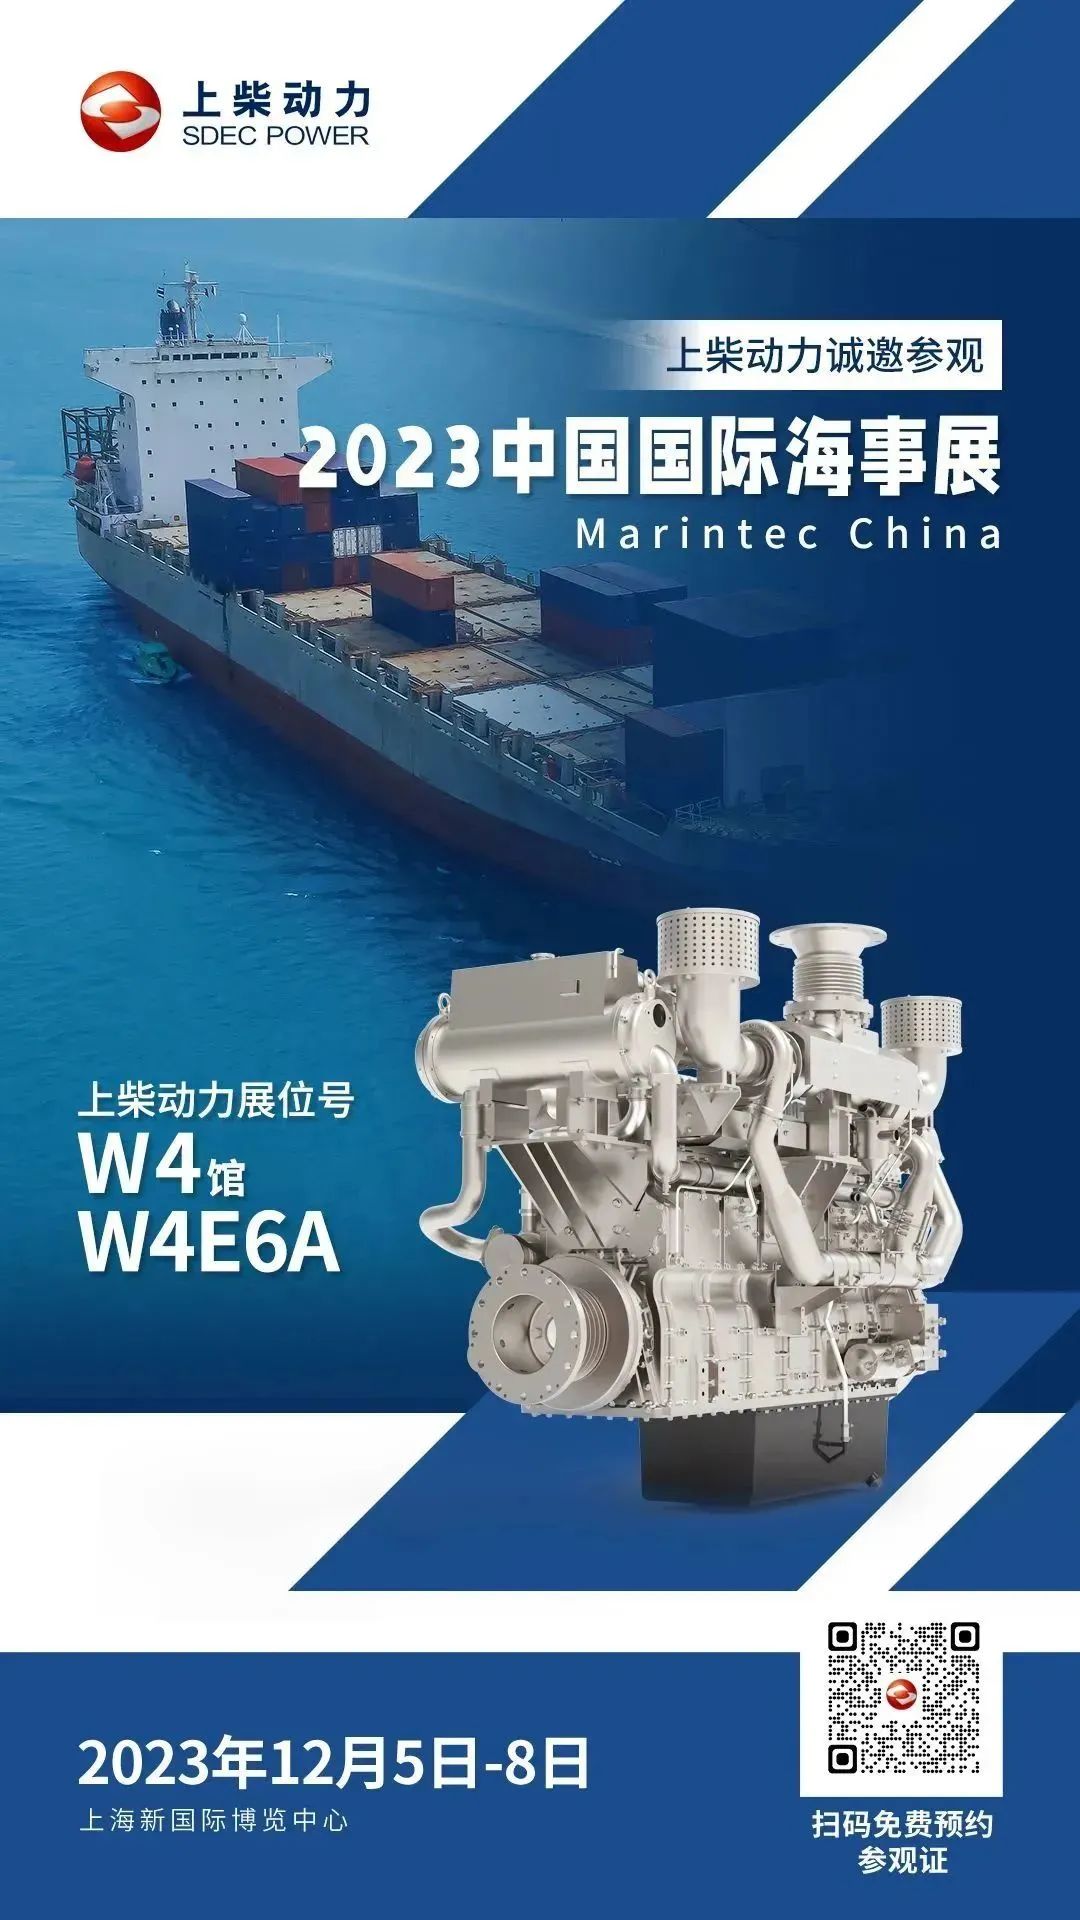 Shanghai Diesel Power invites you to make an appointment to visit "2023 China International Maritime Exhibition"